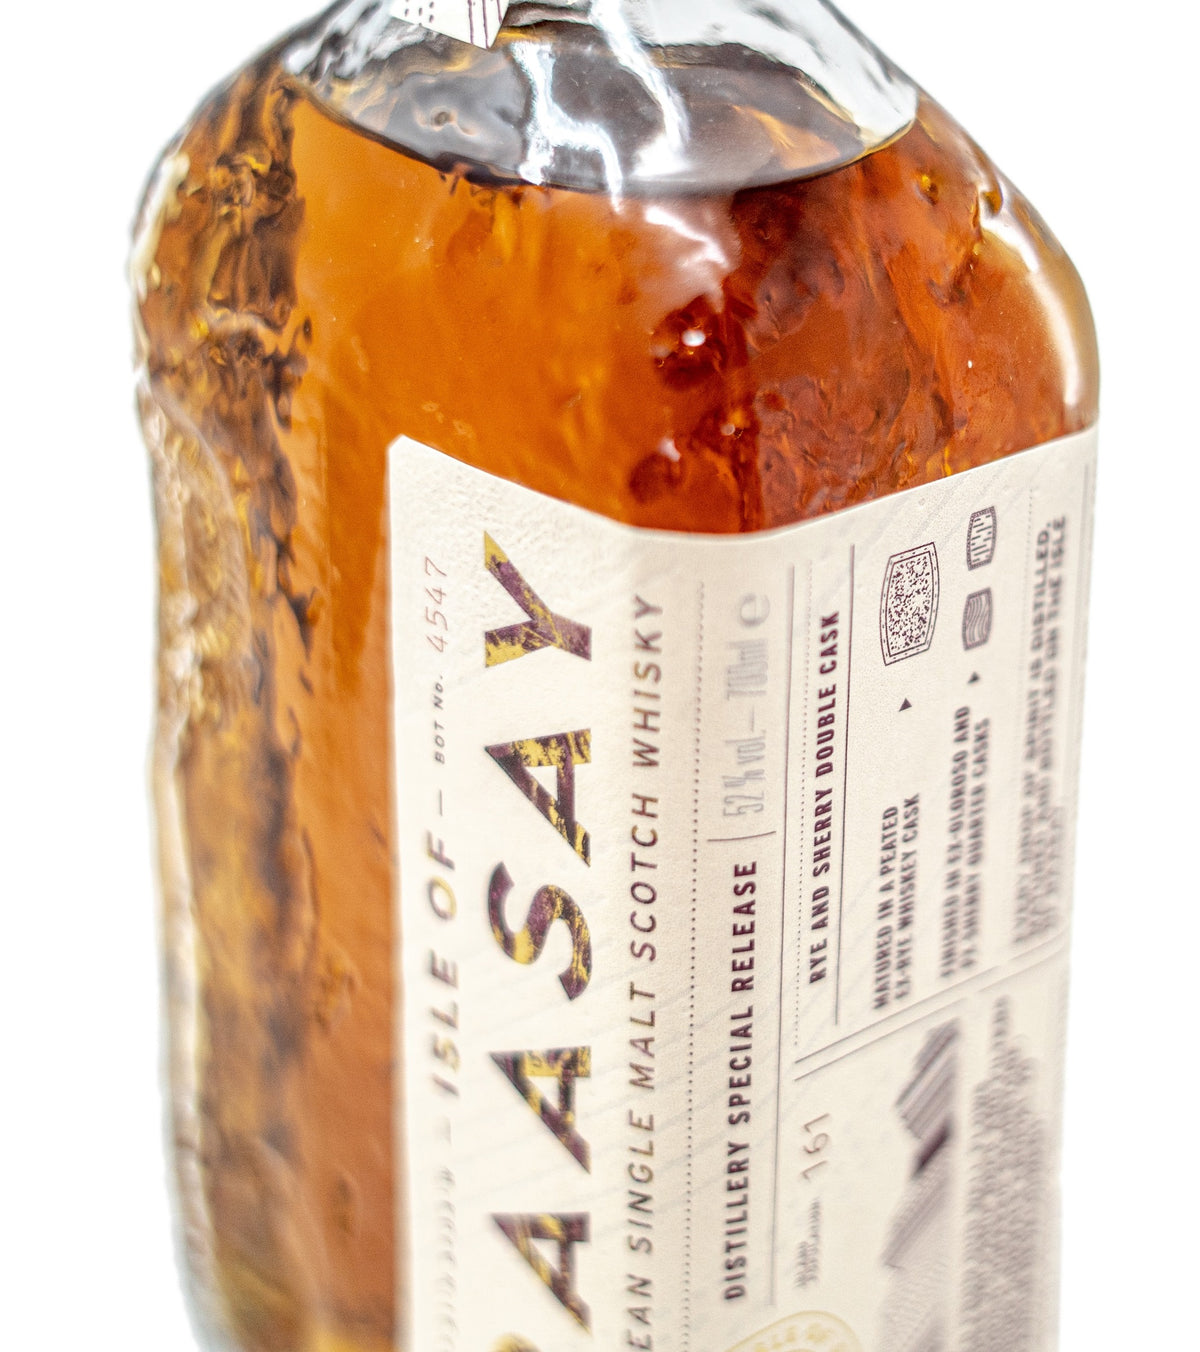 Bottle of Isle of Raasay Distillery Special Release, Sherry Cask Finish, Single Malt Whisky, 52% - The Spirits Room